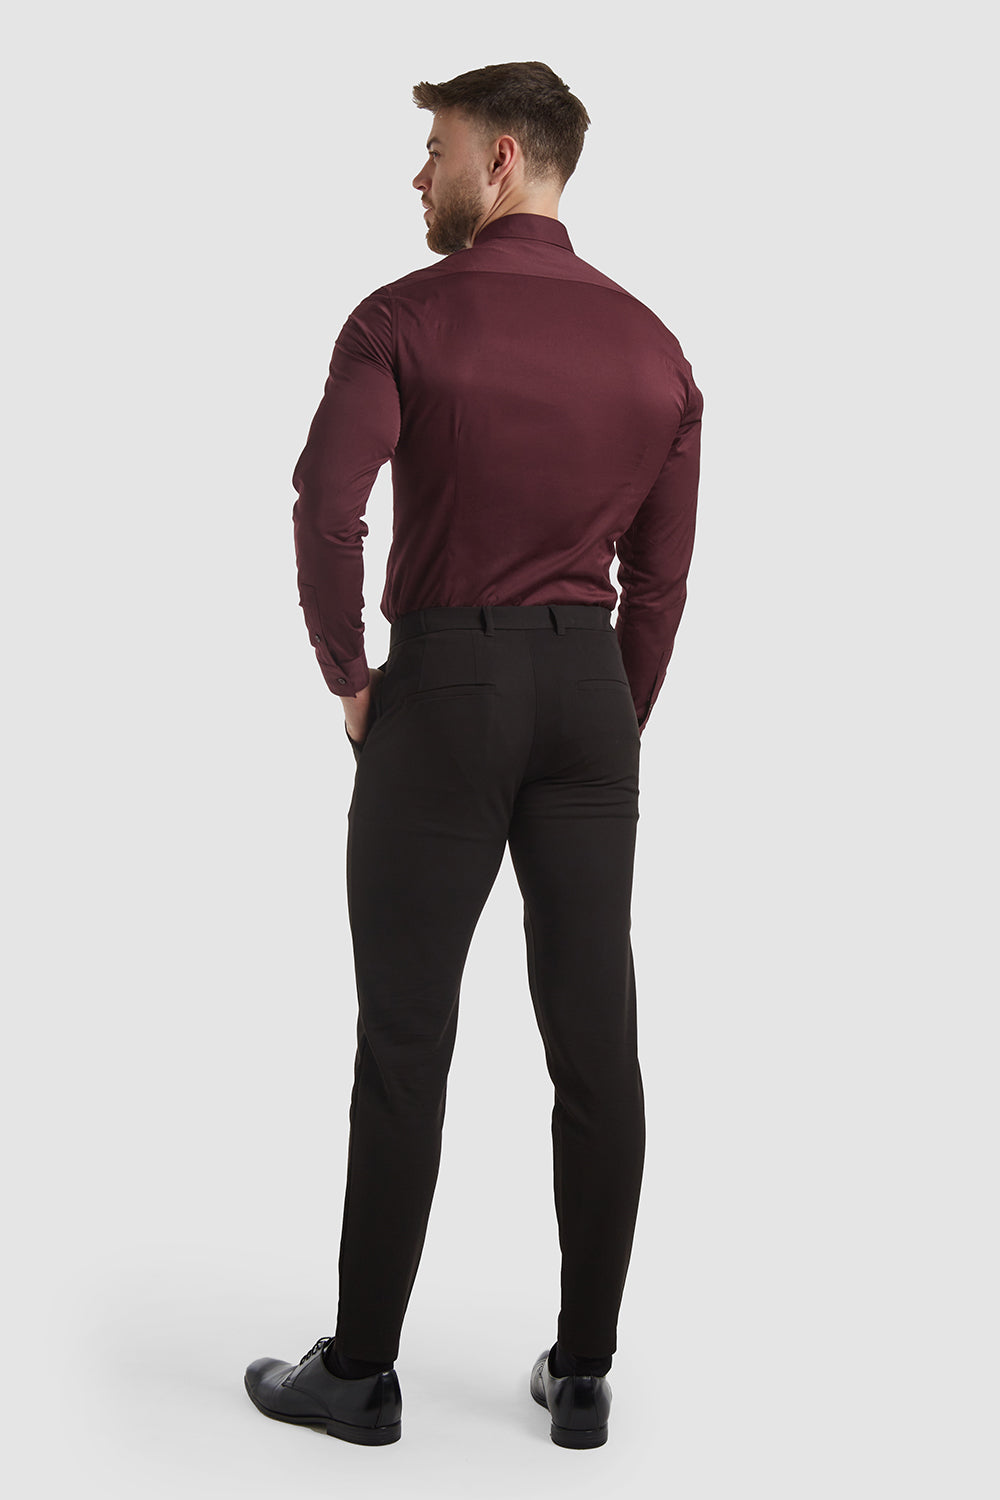 How to Find Dress Pants that Fit Well (Sizing Guide) - TAILORED ATHLETE -  USA